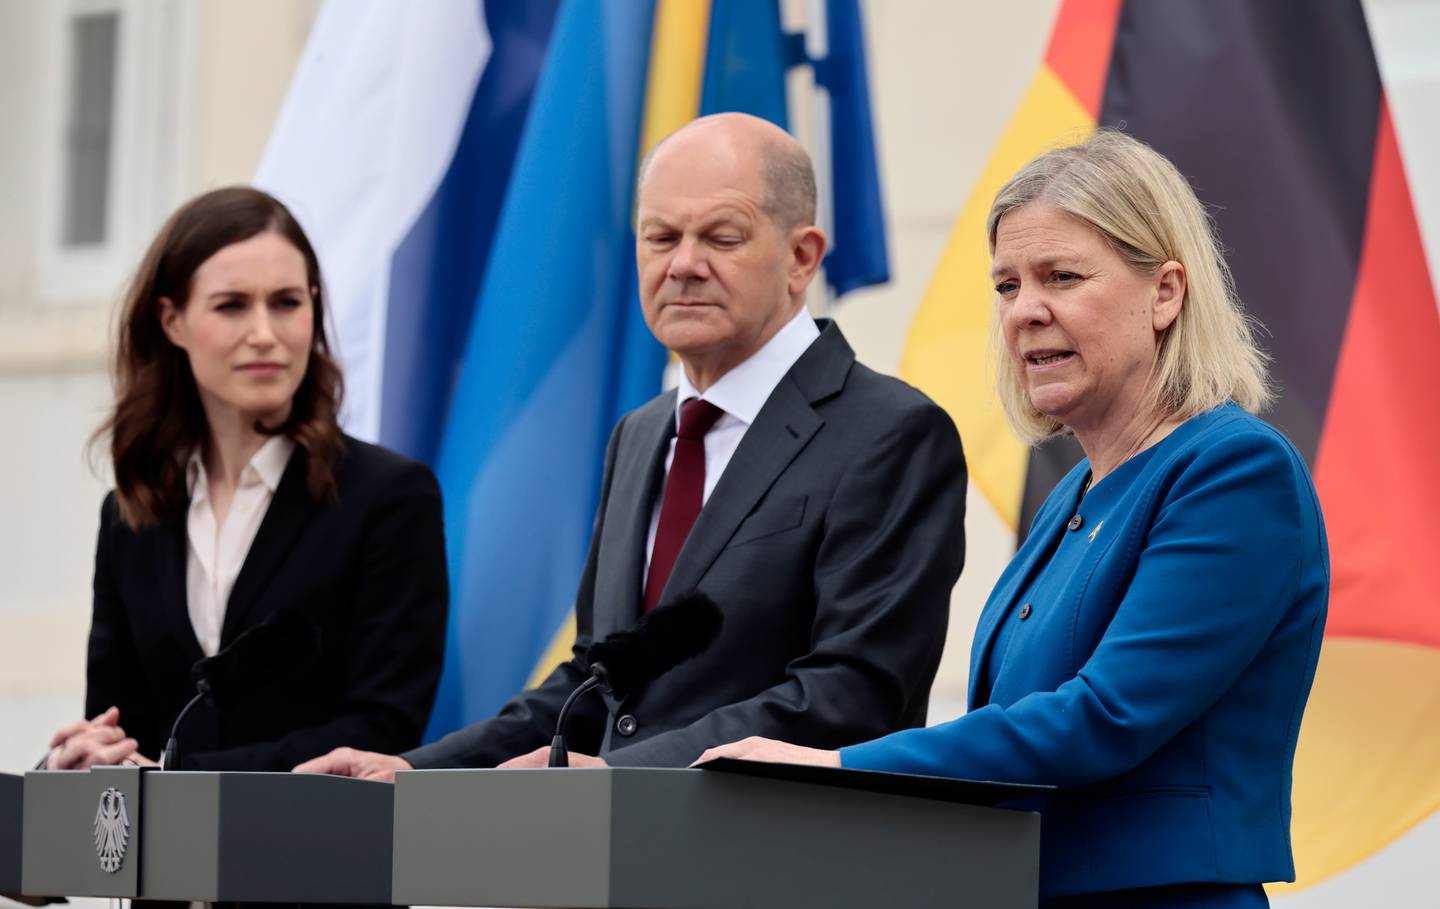 Finnish Prime Minister Sanna Marin, German Chancellor Olaf Scholz and Swedish Prime Minister Magdalena Andersson. Photo / Getty